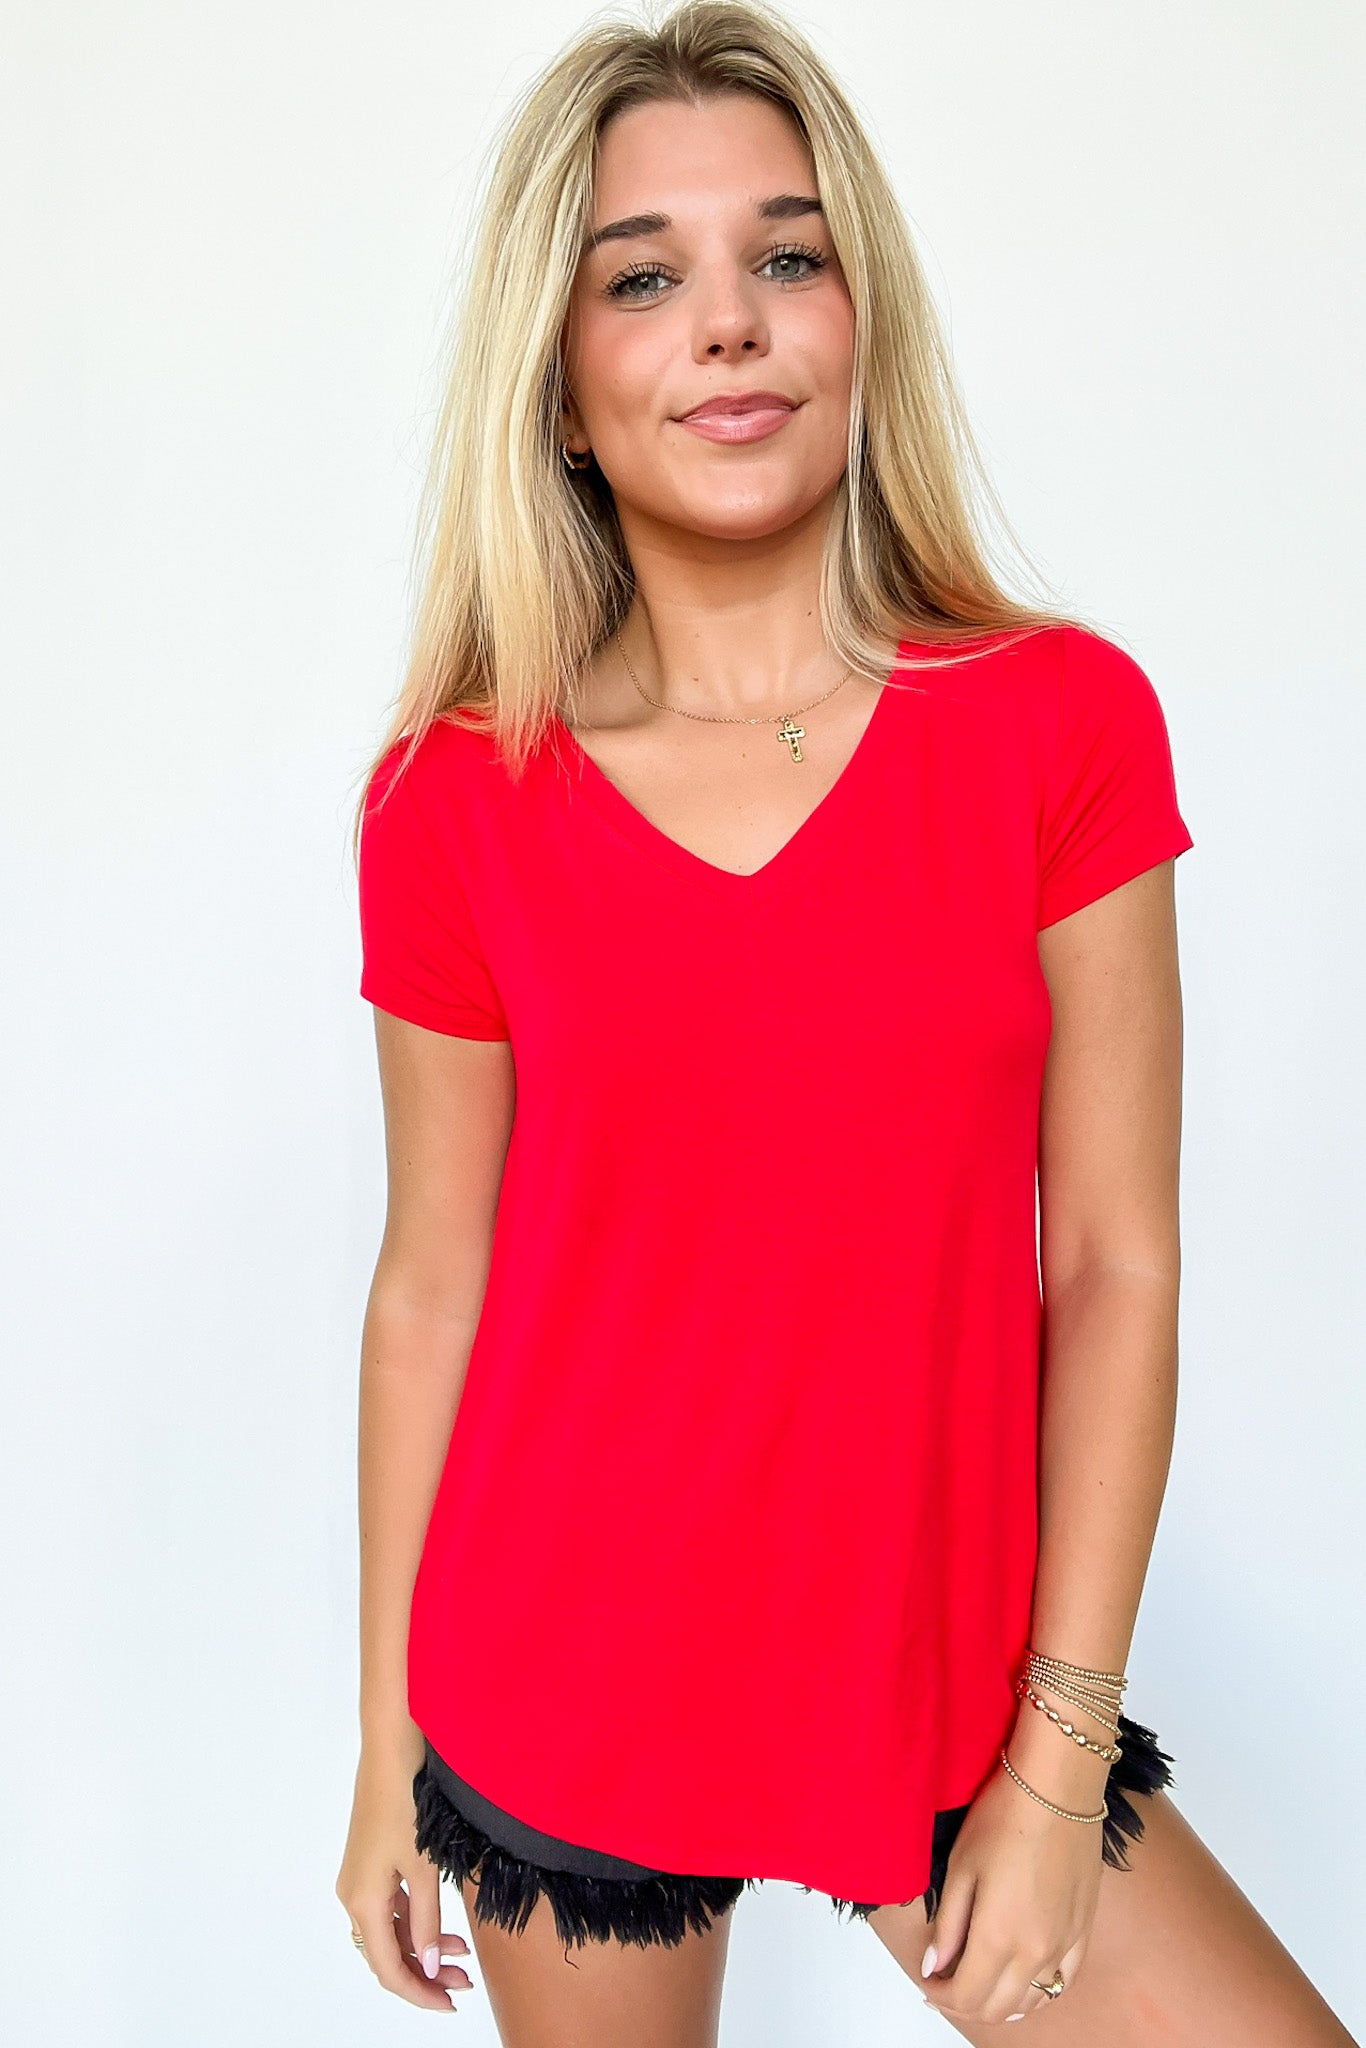  Jayme V-Neck Short Sleeve Top - Madison and Mallory